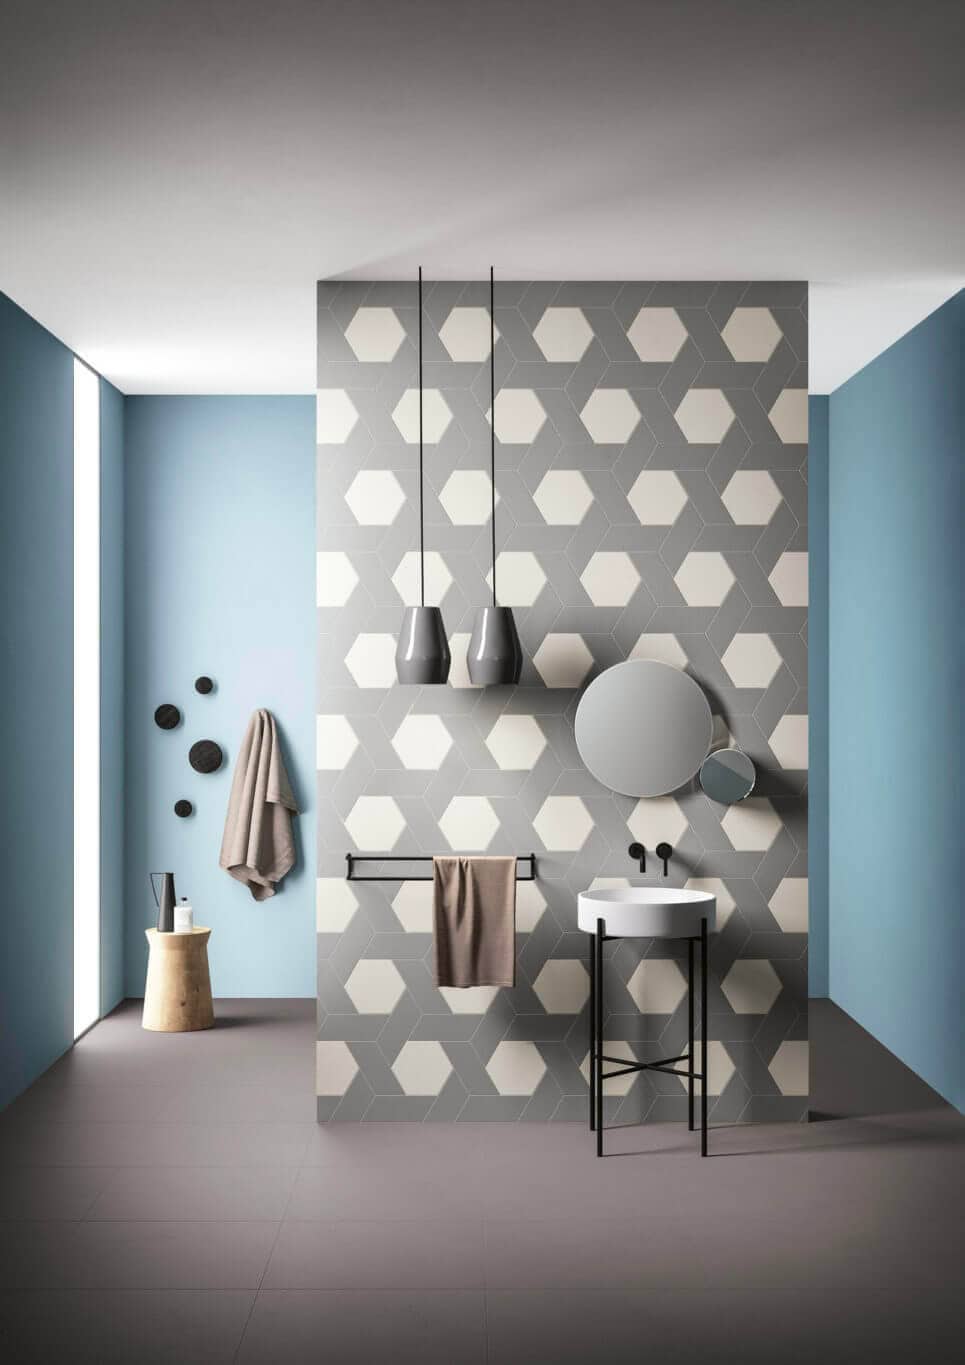 Hexagon and rhombus tiles in gray and white